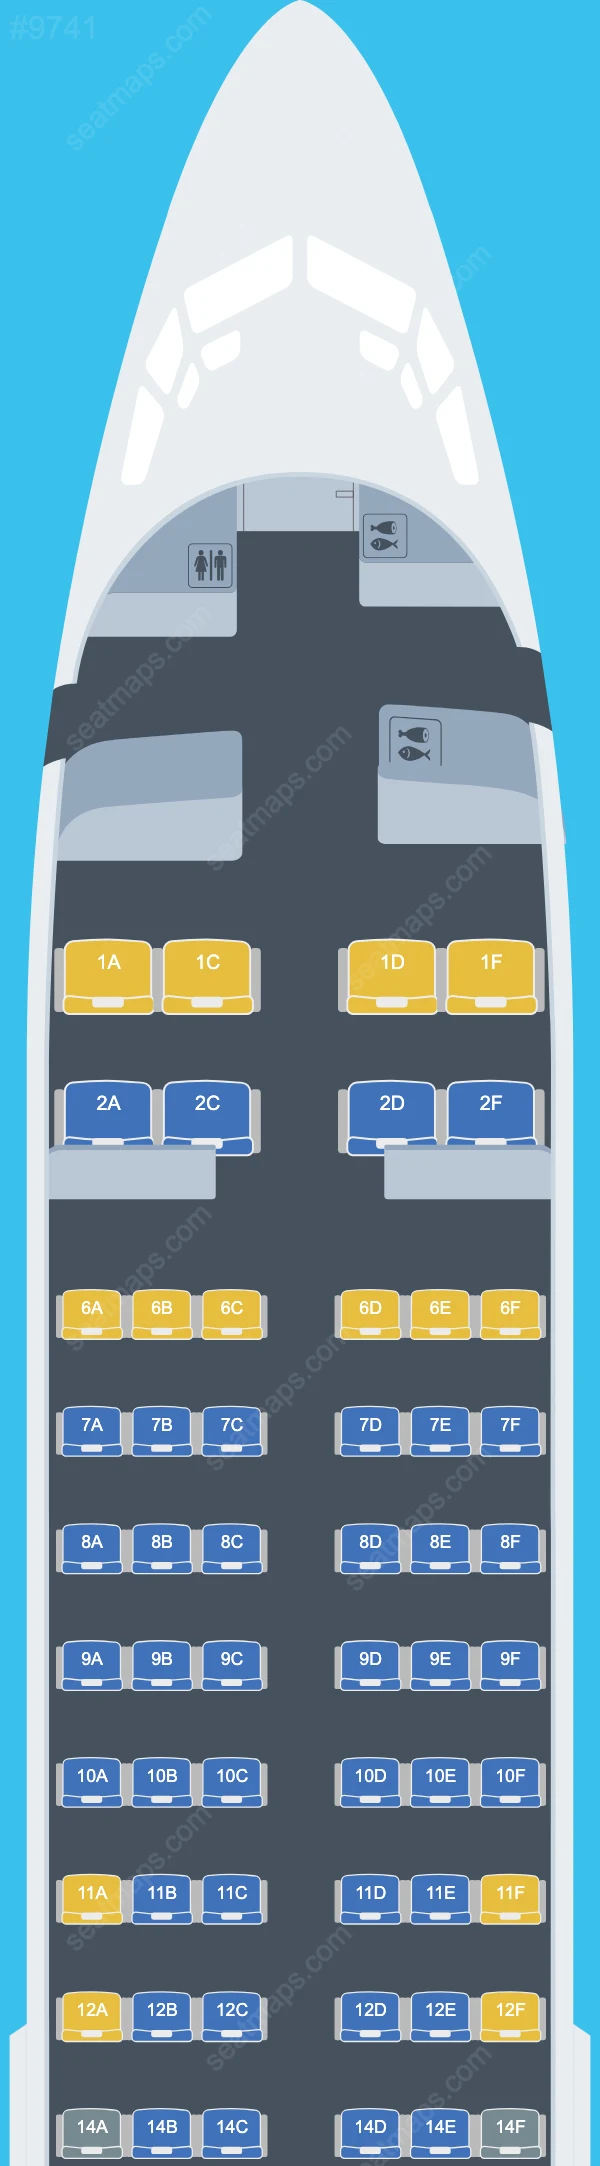 Jonika Airlines Boeing 737 Seat Maps 737-400 V.2